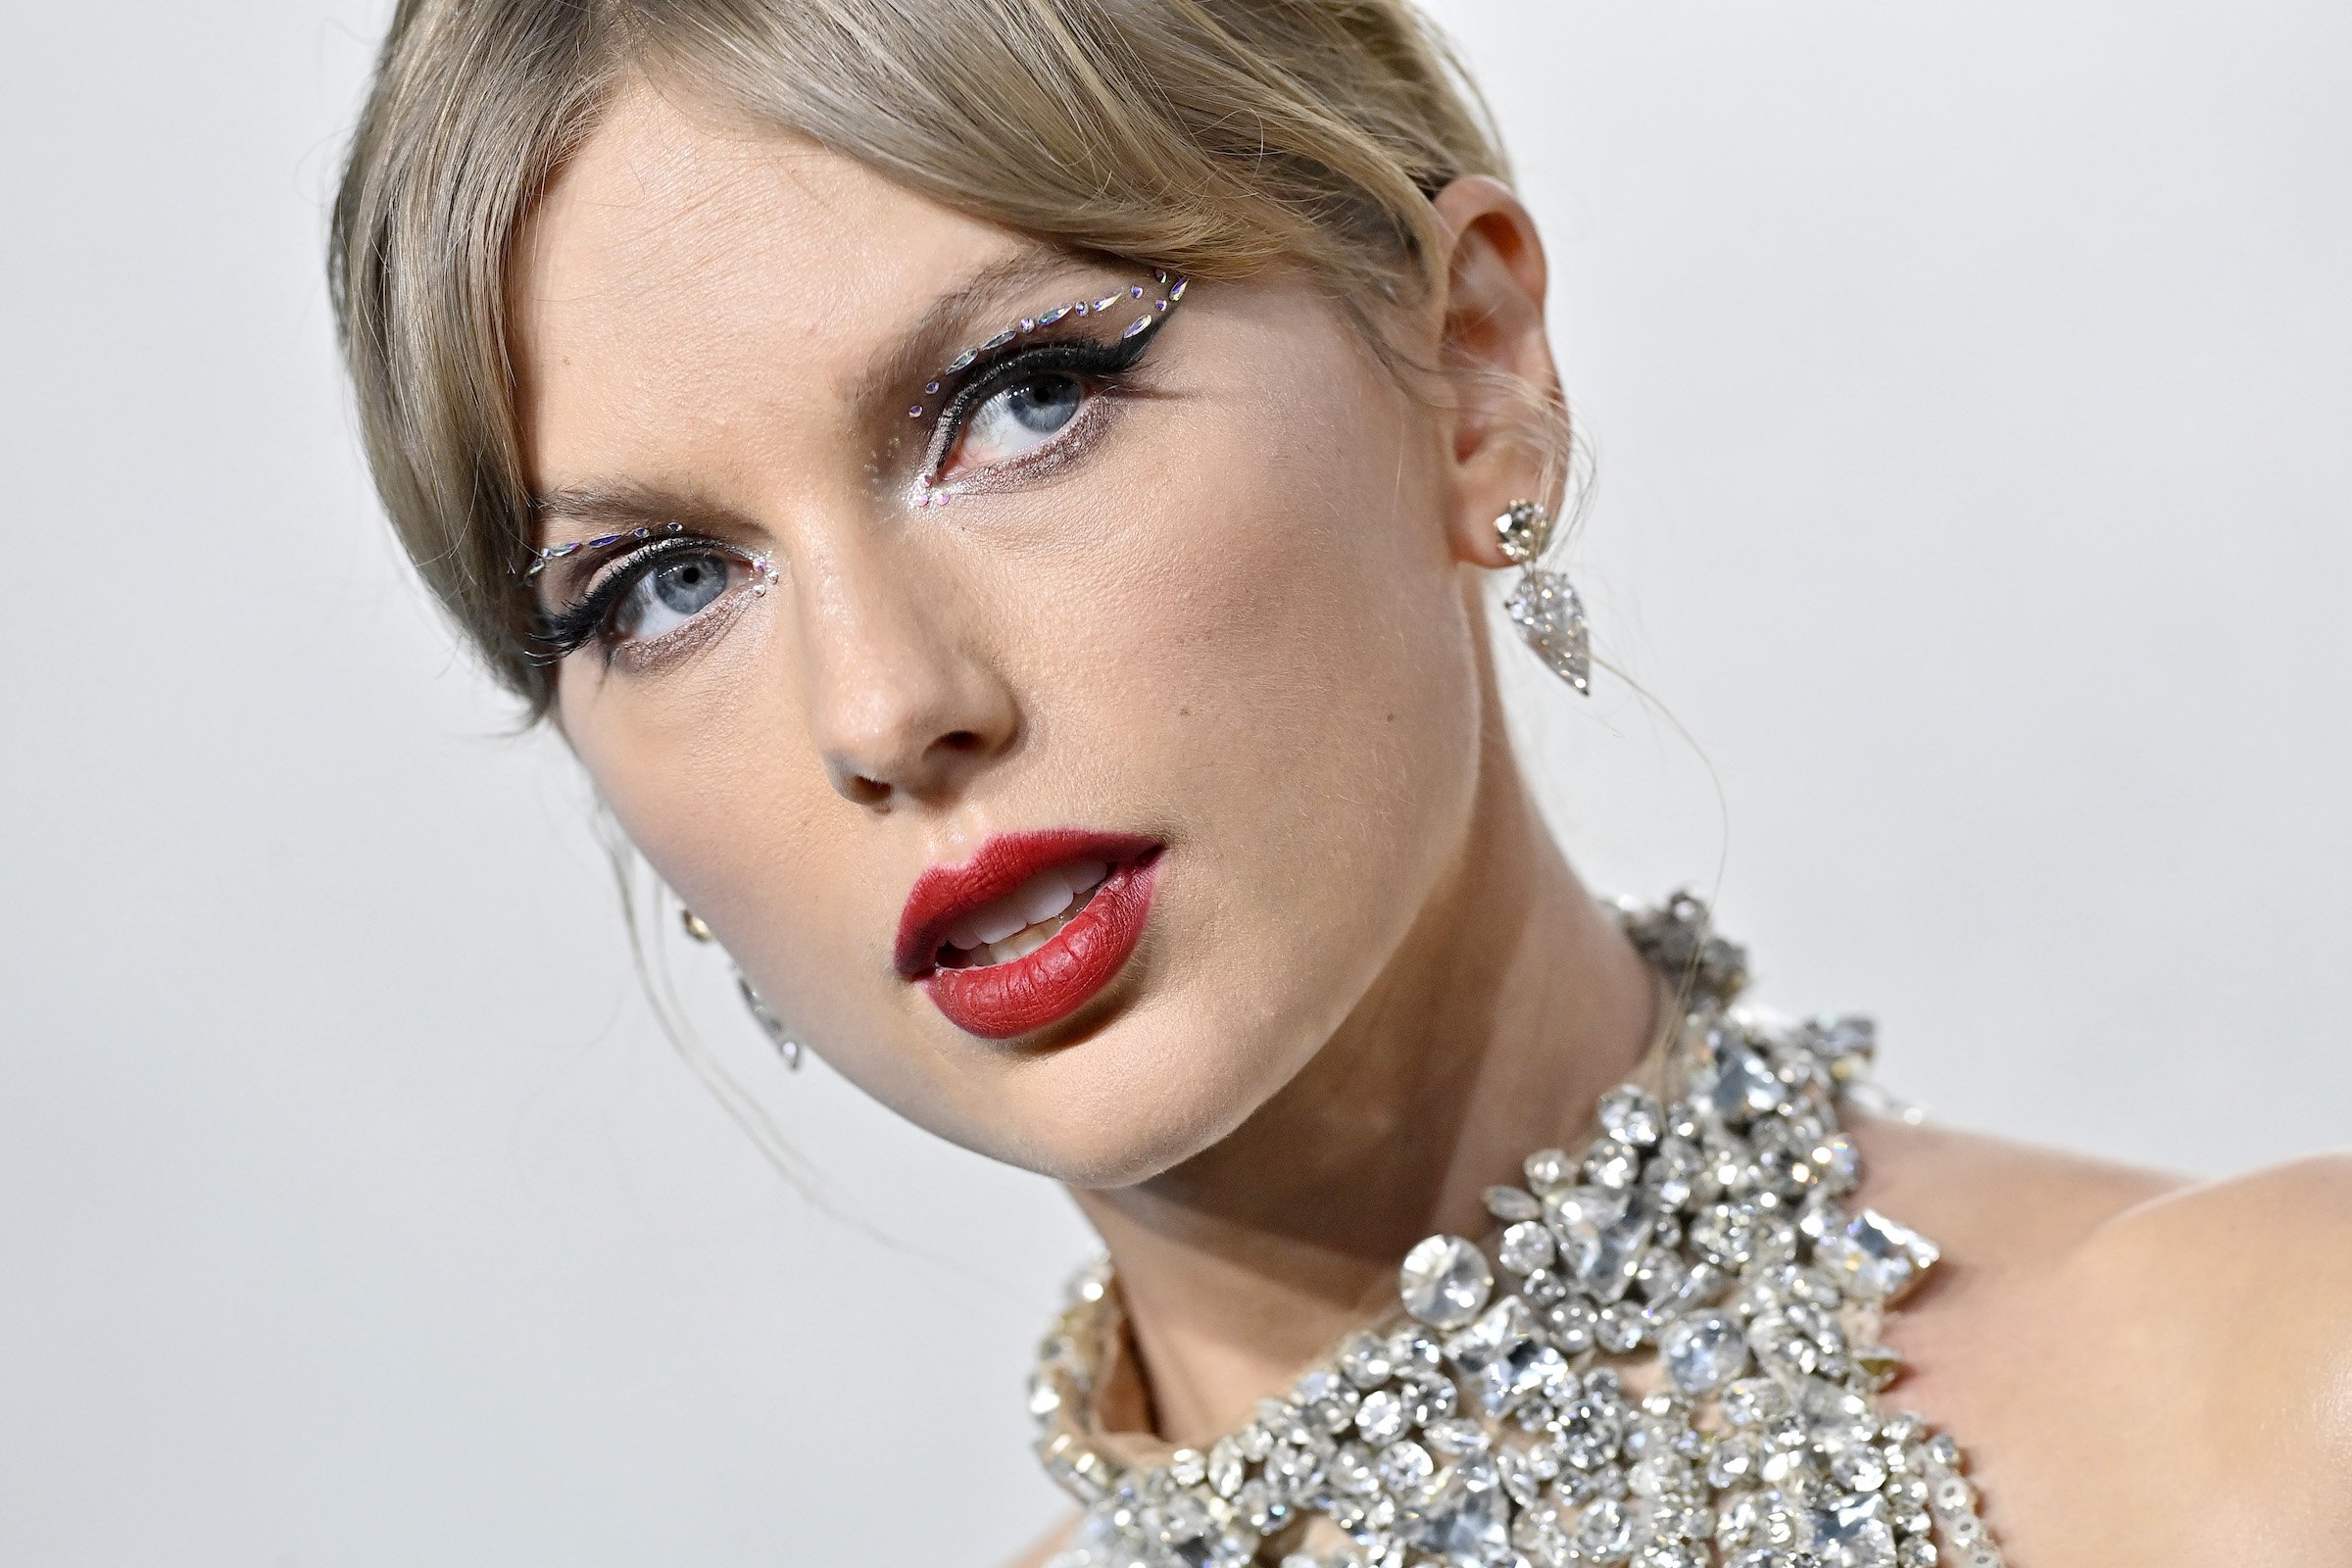 Taylor Swift, whose 'All Too Well' short film won at the VMAs, wearing red lipstick